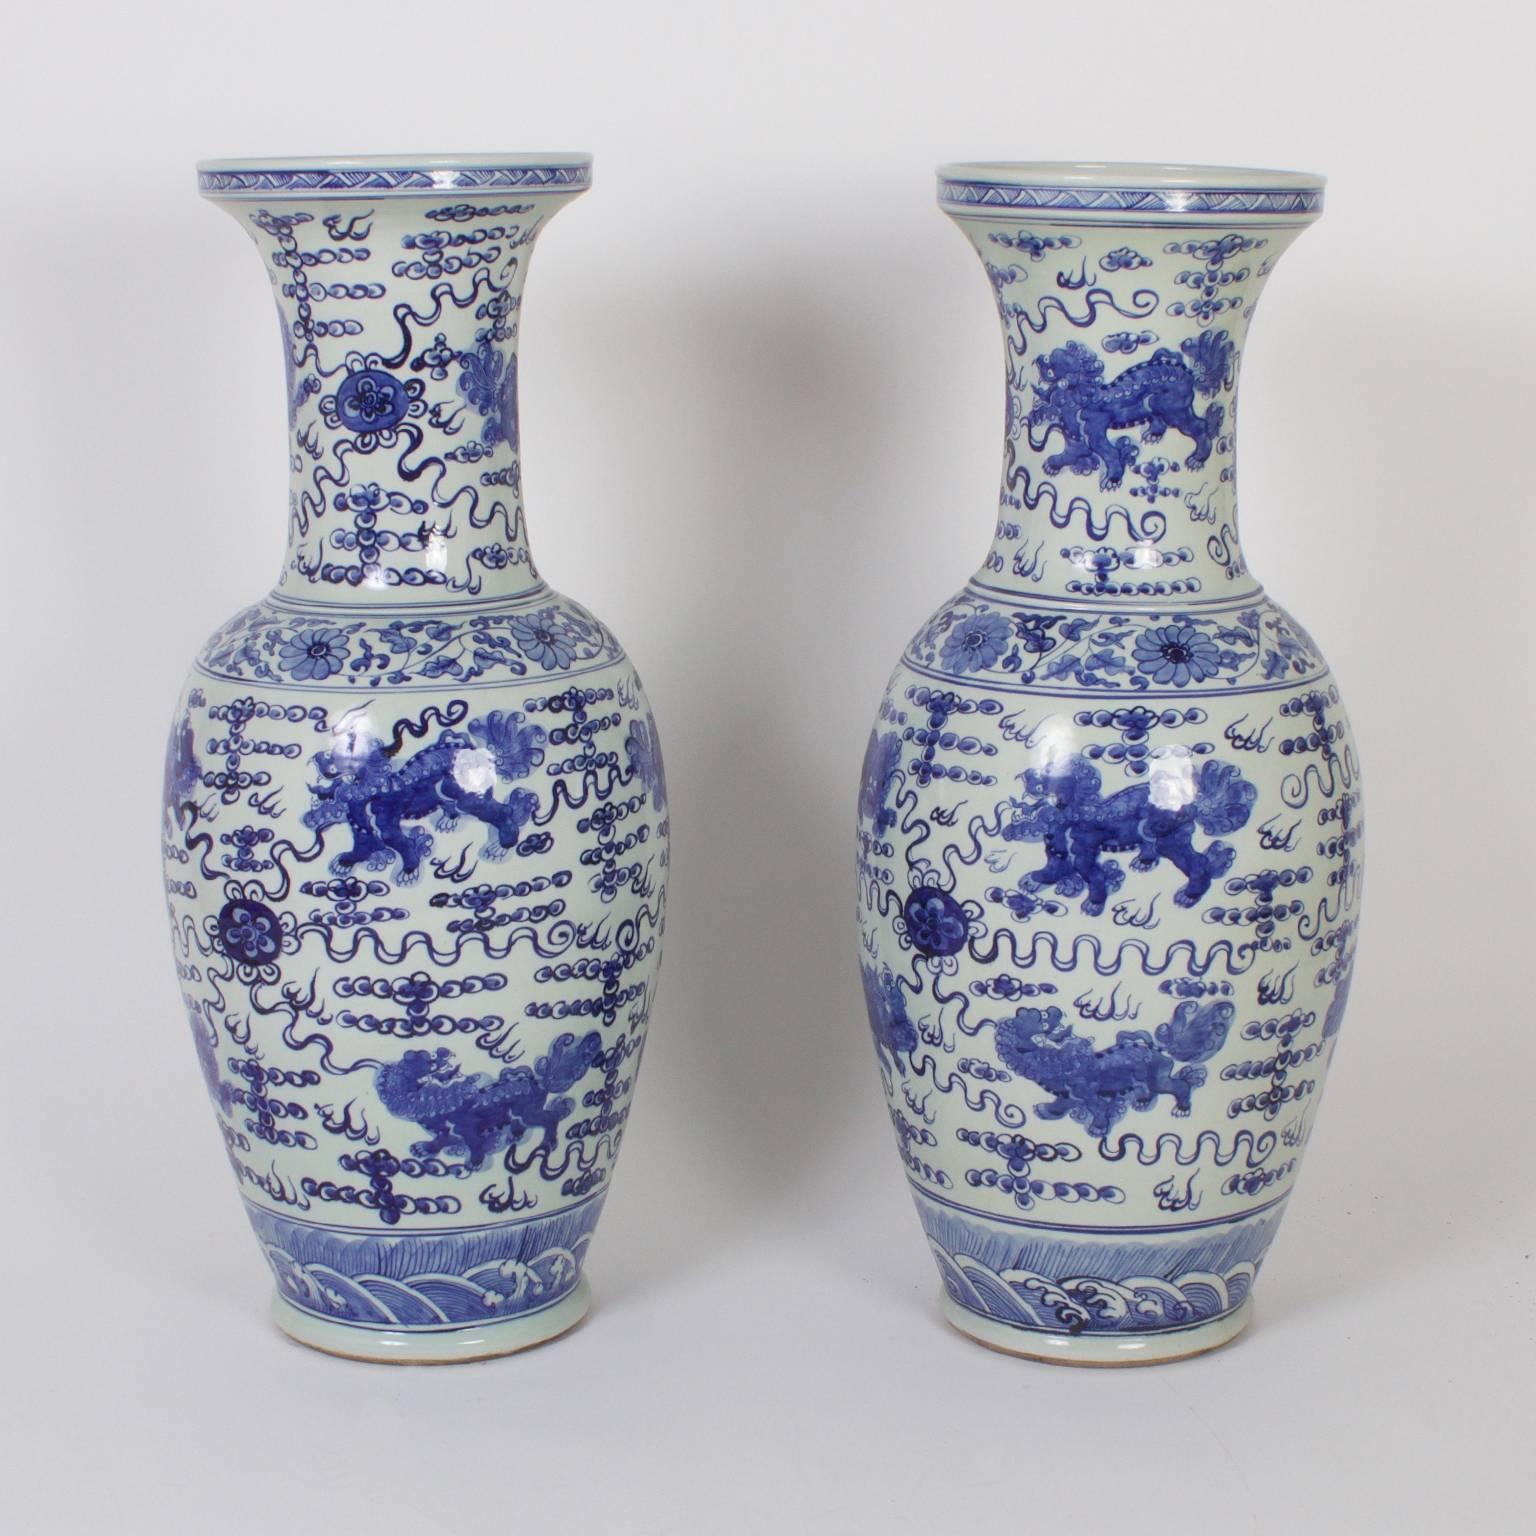 Chinoiserie Impressive Pair of Chinese Blue and White Porcelain Palace Vases